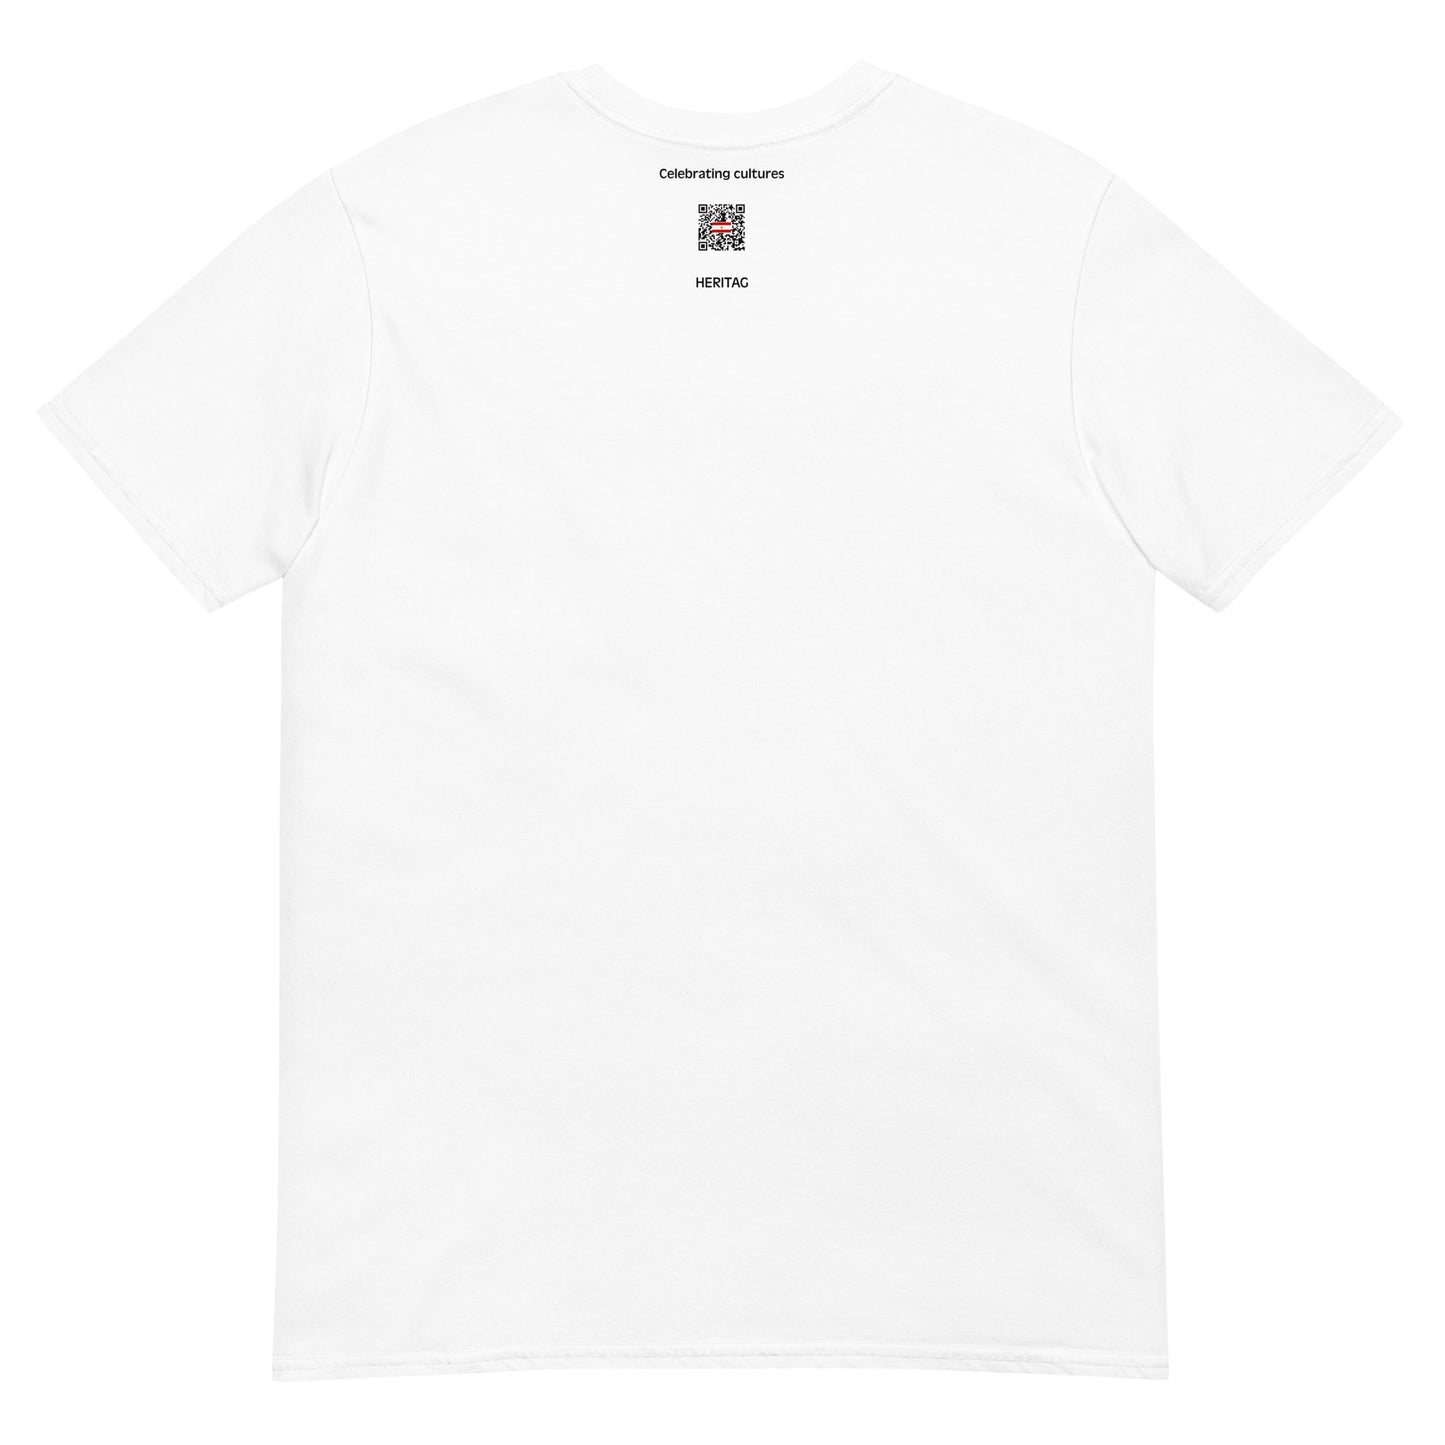 Trucial States II (1968-1971) | UAE Flag Interactive History T-Shirt